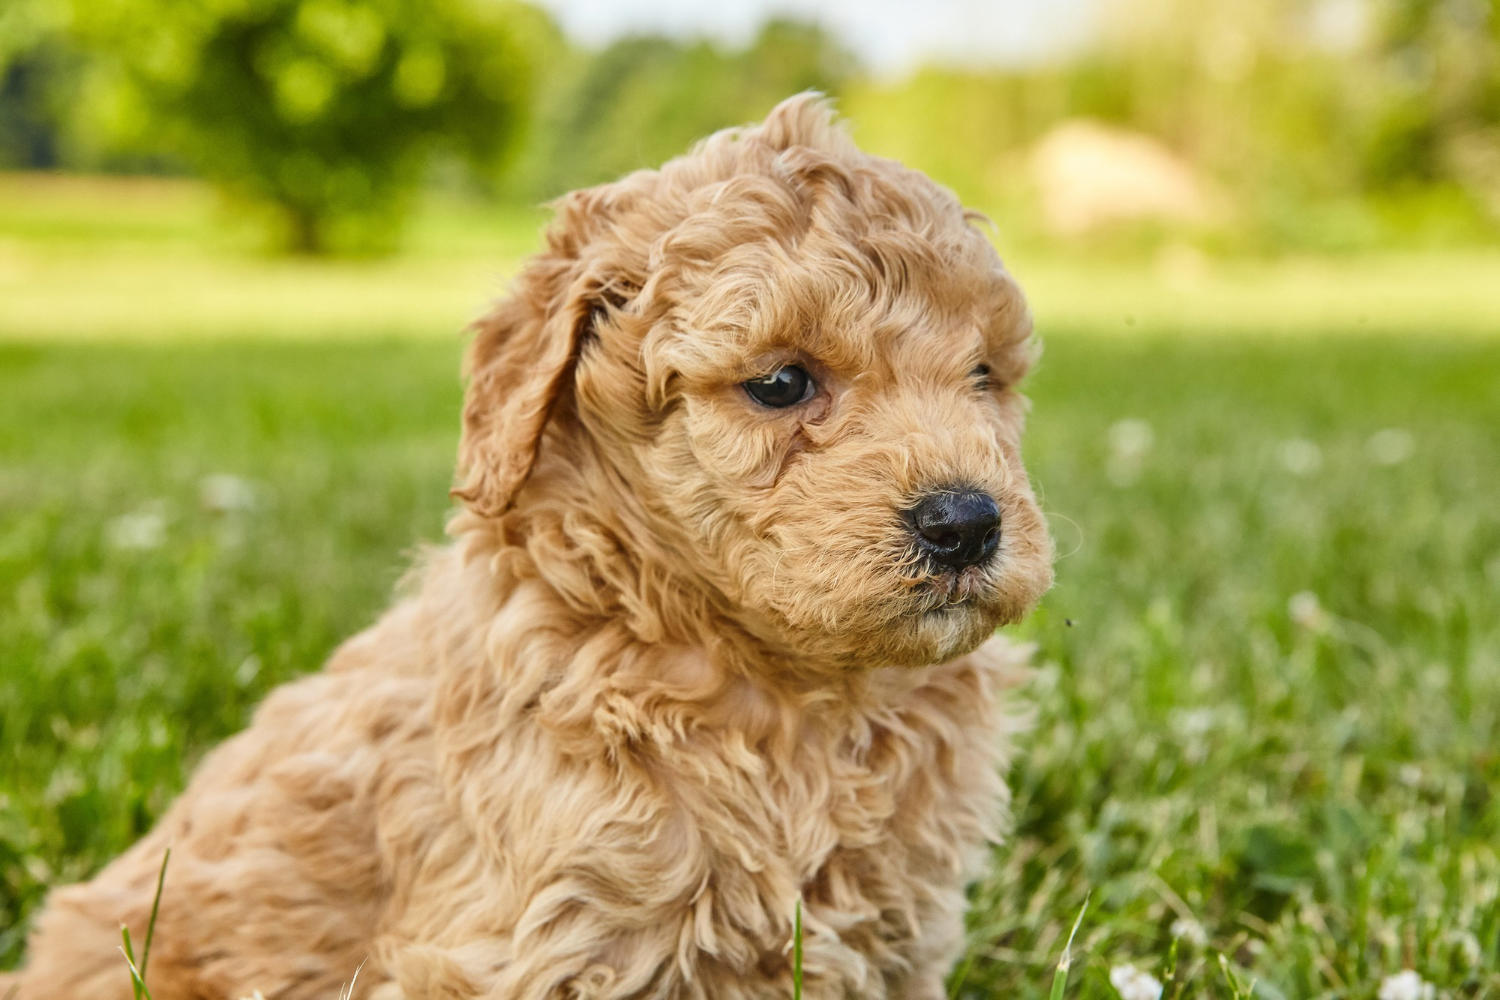 "How to Determine the Right Crate Size for Your Medium Goldendoodle"